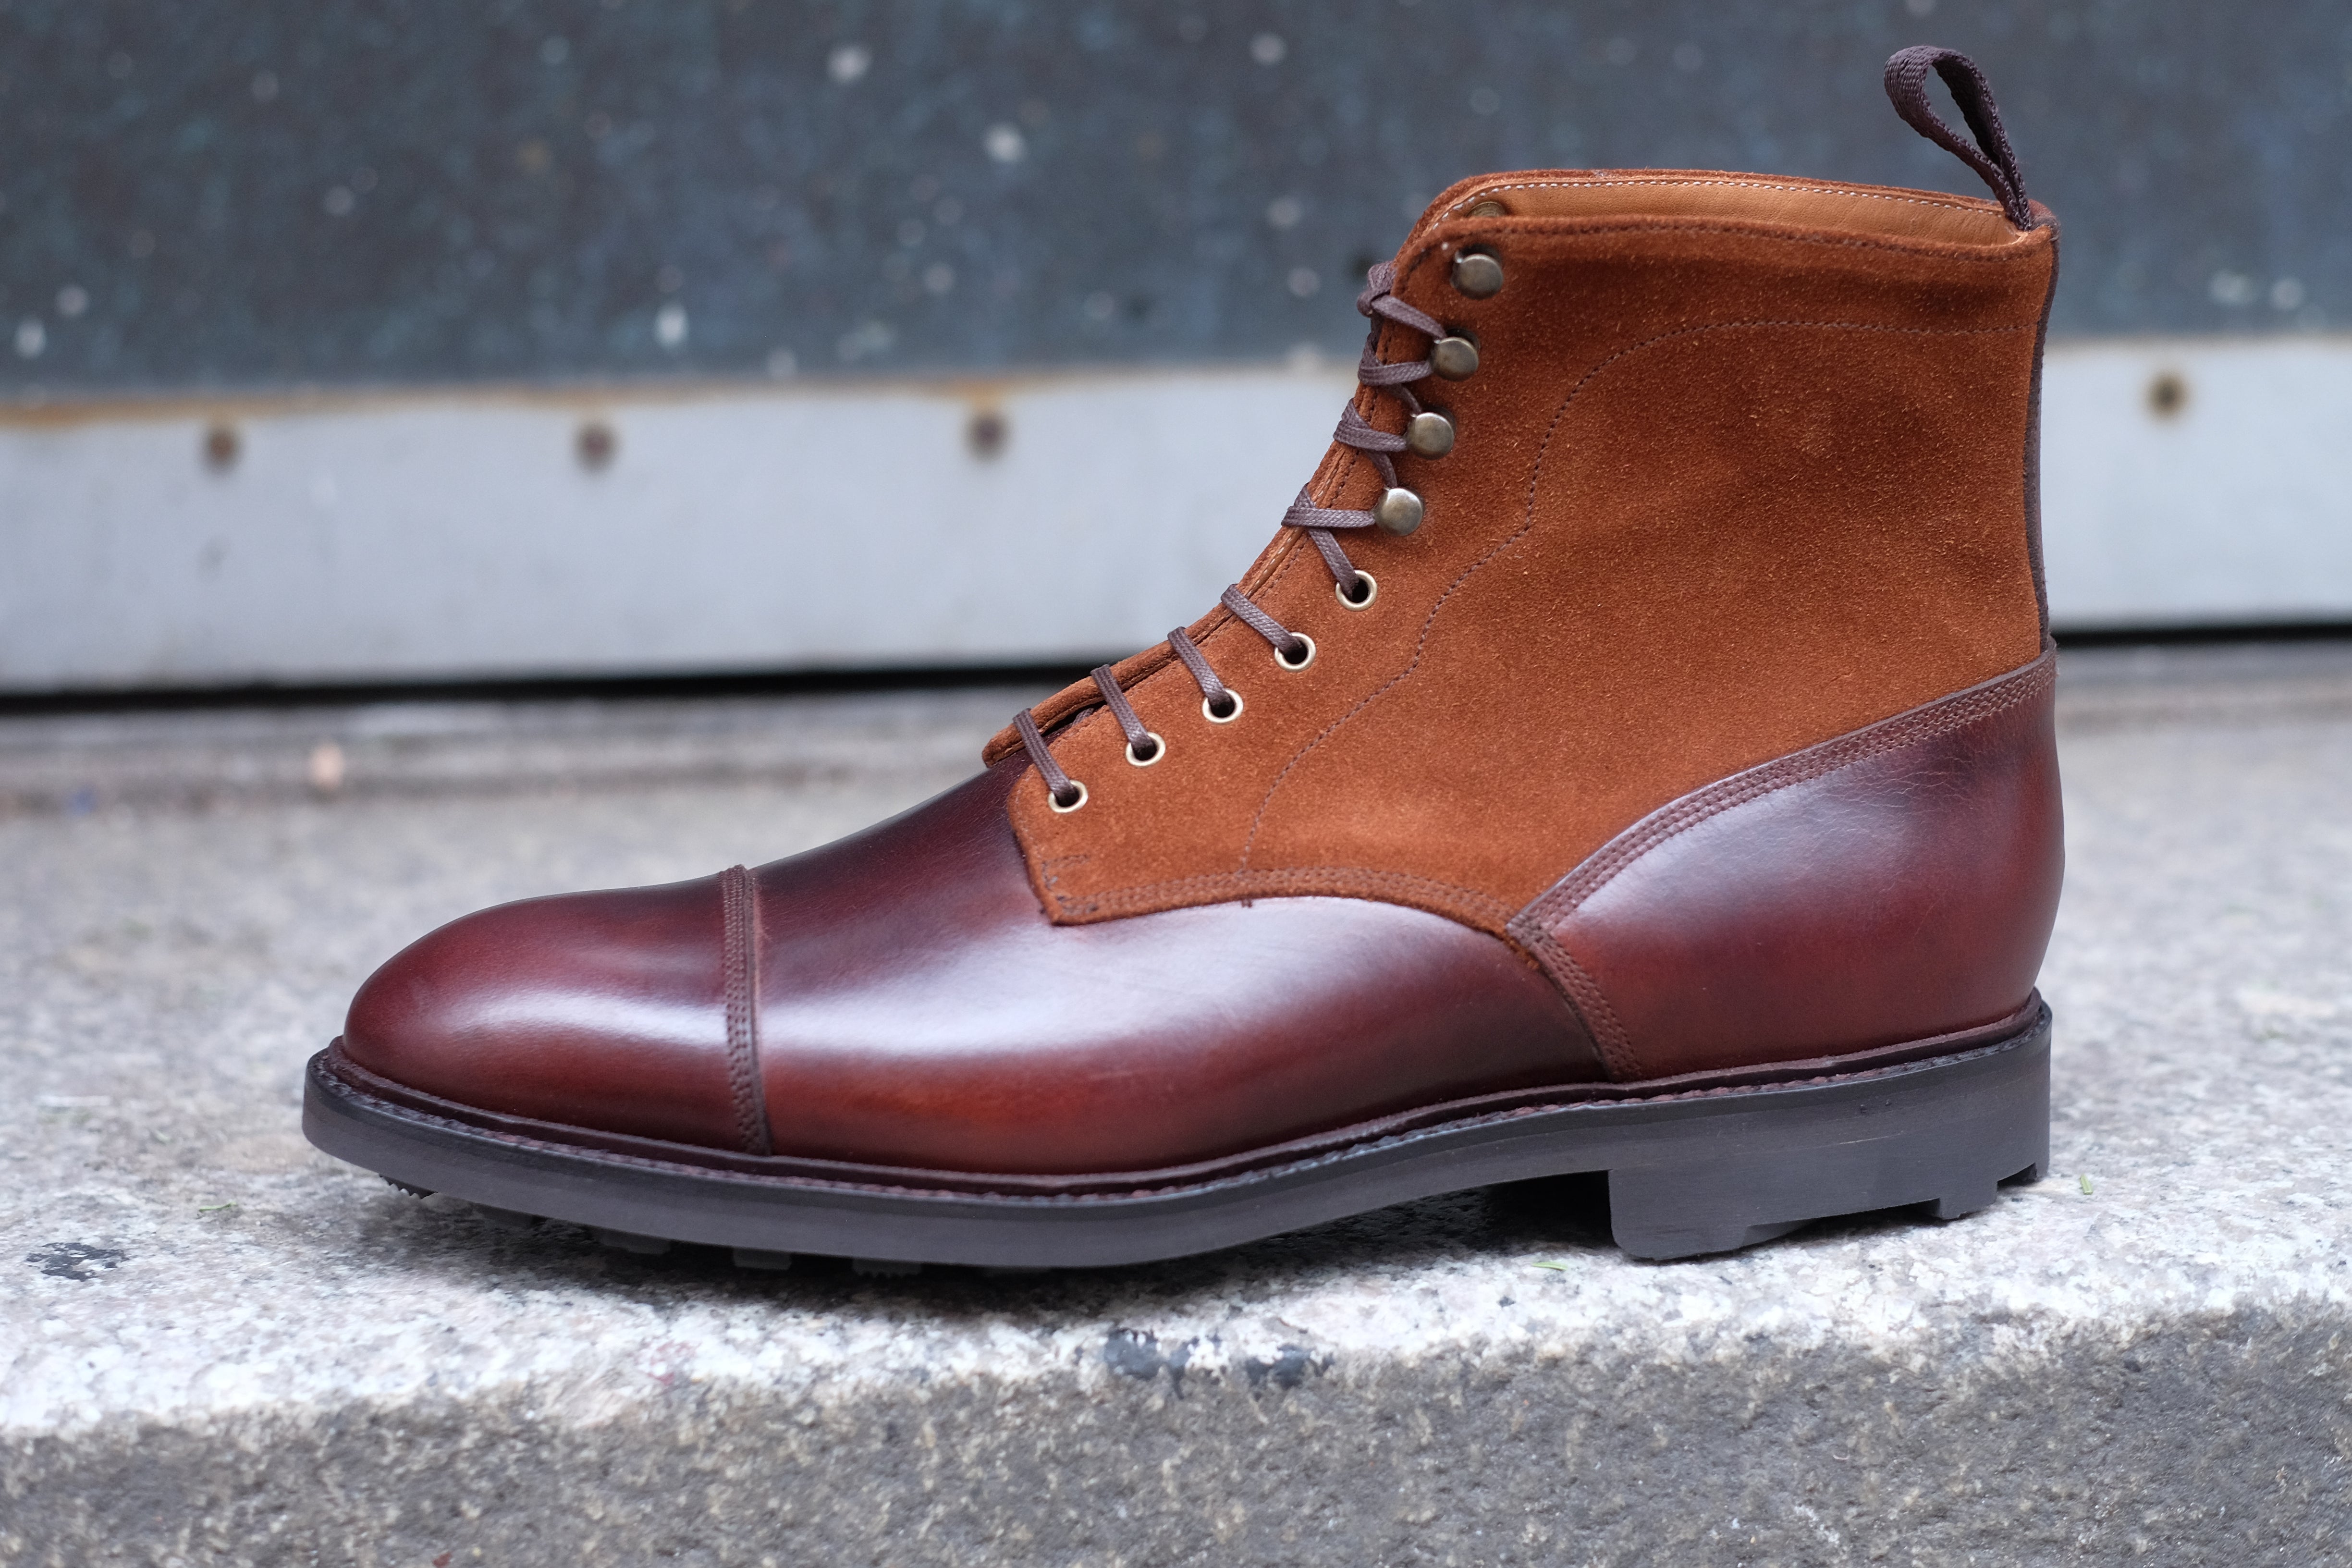 Delridge - MTO - Rugged Brown / Snuff Suede - NGT Last - Double Rugged Rubber Sole w/ Stormwelt